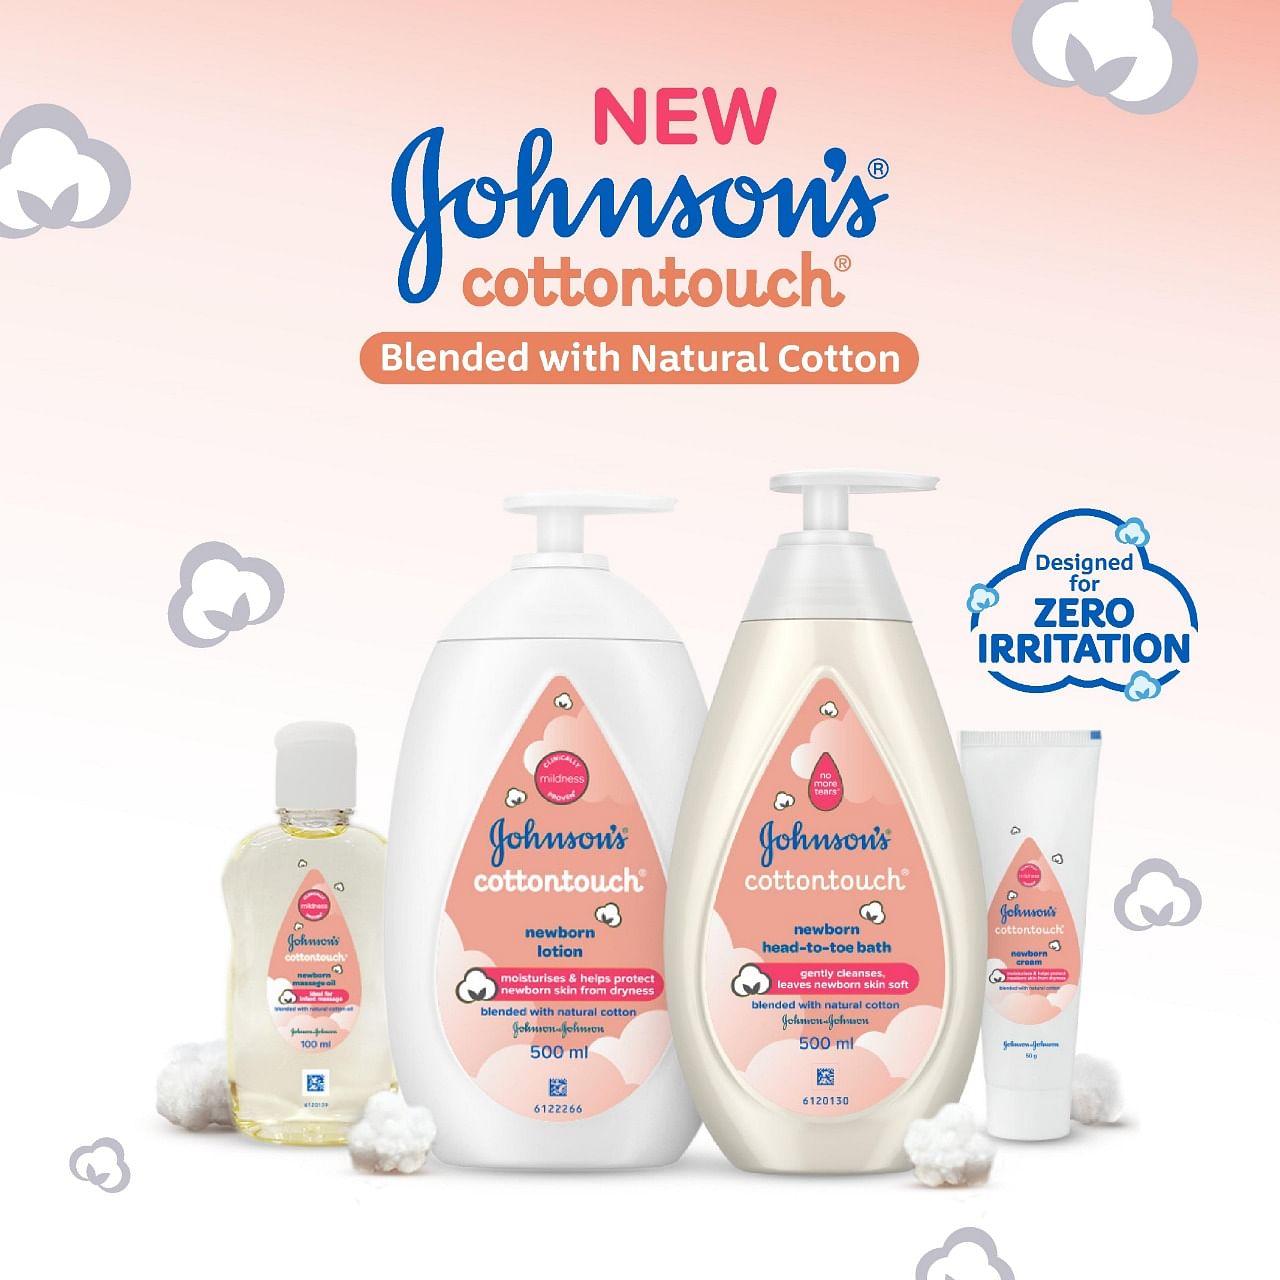 Johnson's Baby launches new baby care products. Credit: Johnson's Baby